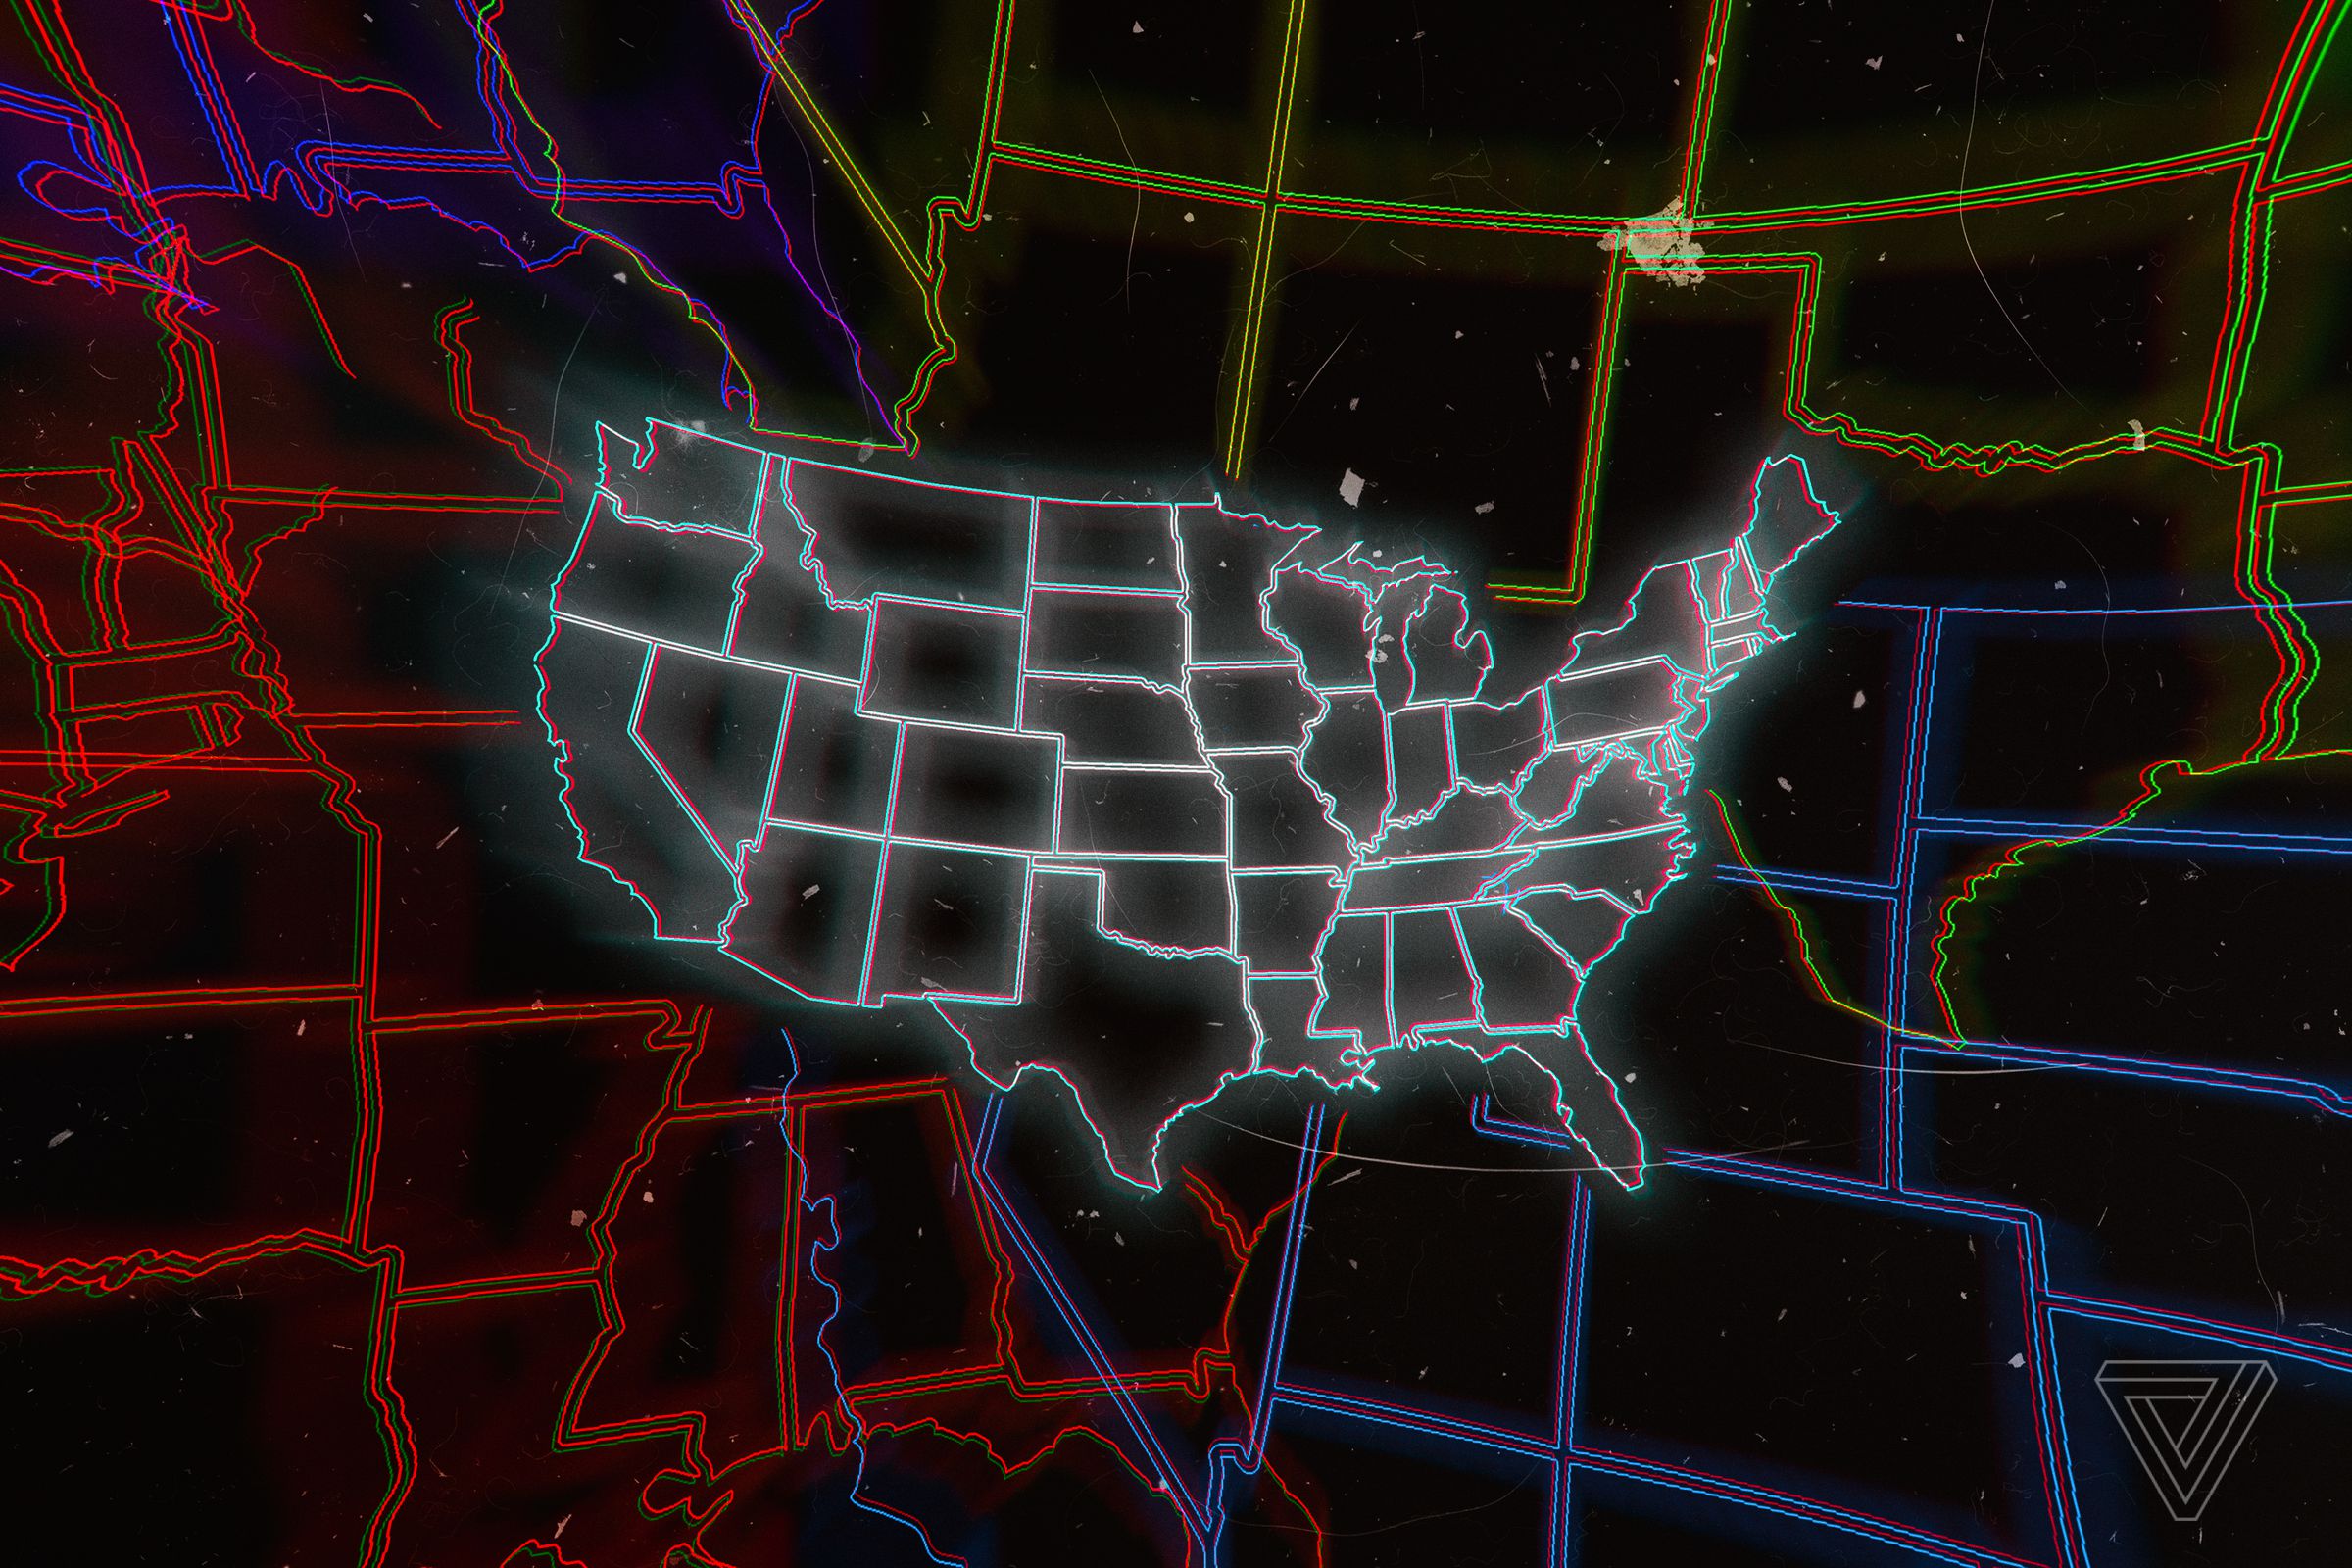 A graphic showing a map of the United States on a black background